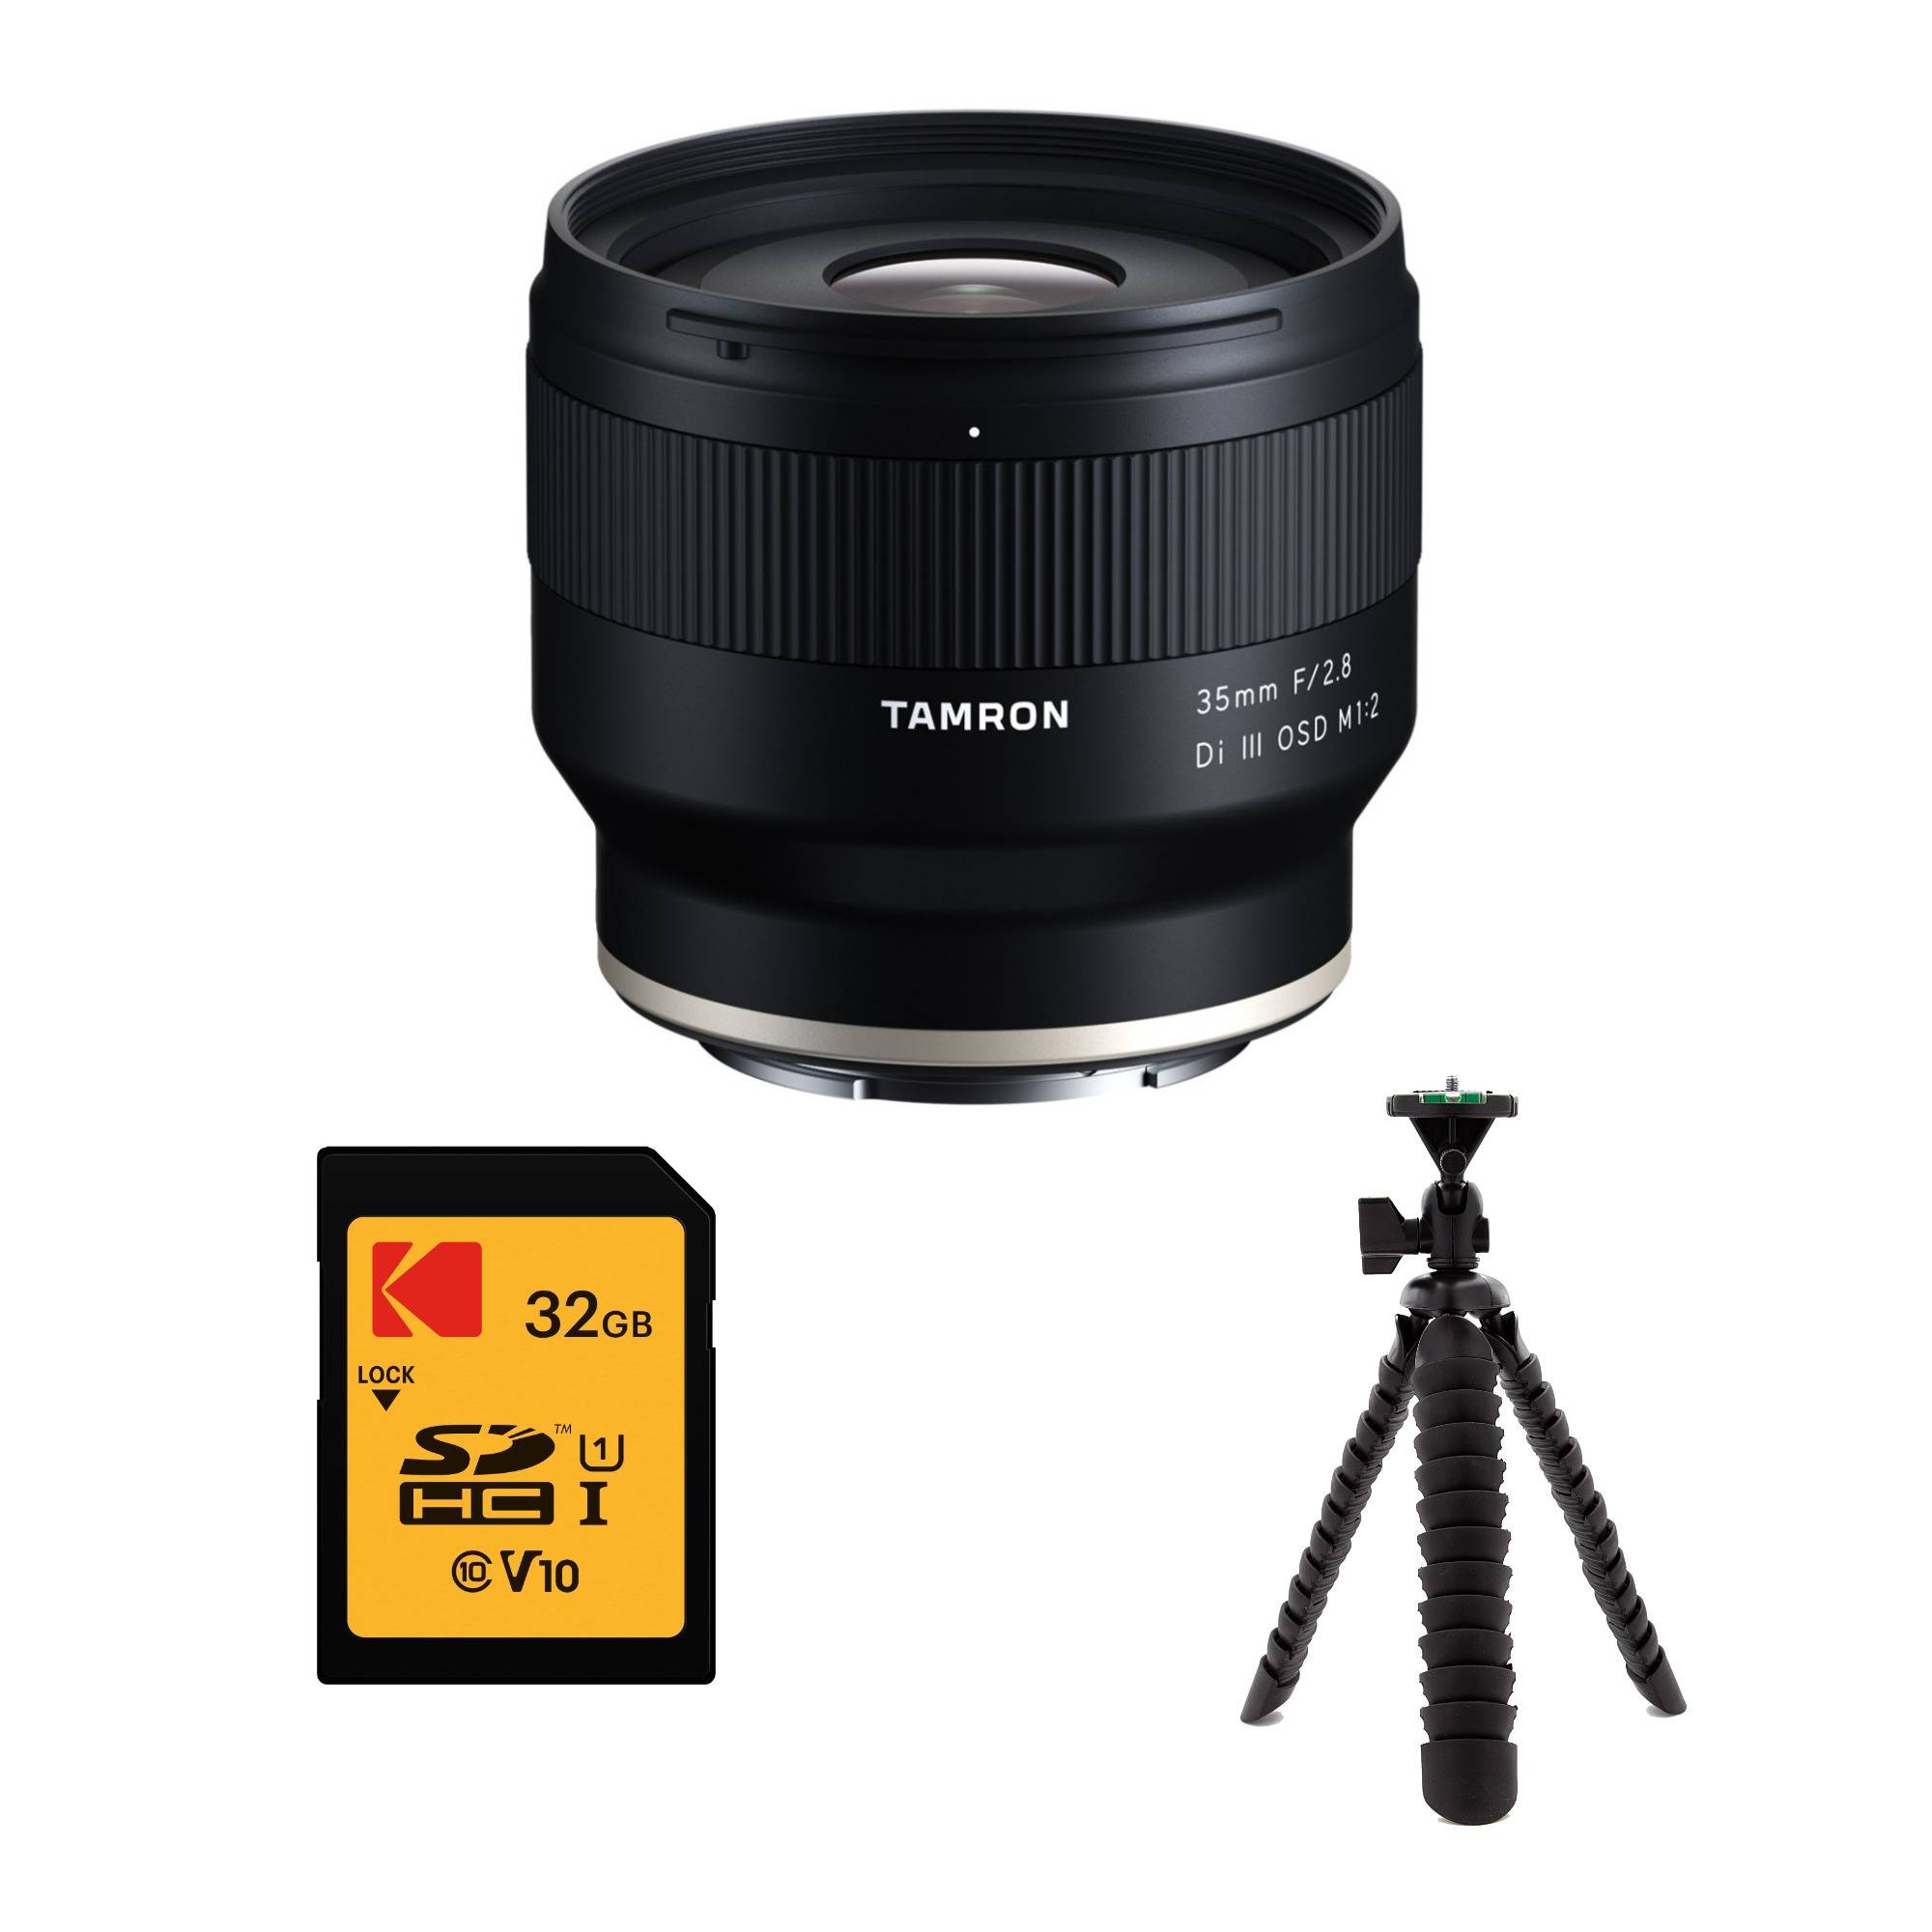 Tamron 35mm f/2.8 Di III OSD Wide-Angle Prime Lens for Sony E-Mount with 16GB SDHC Card and Tripod